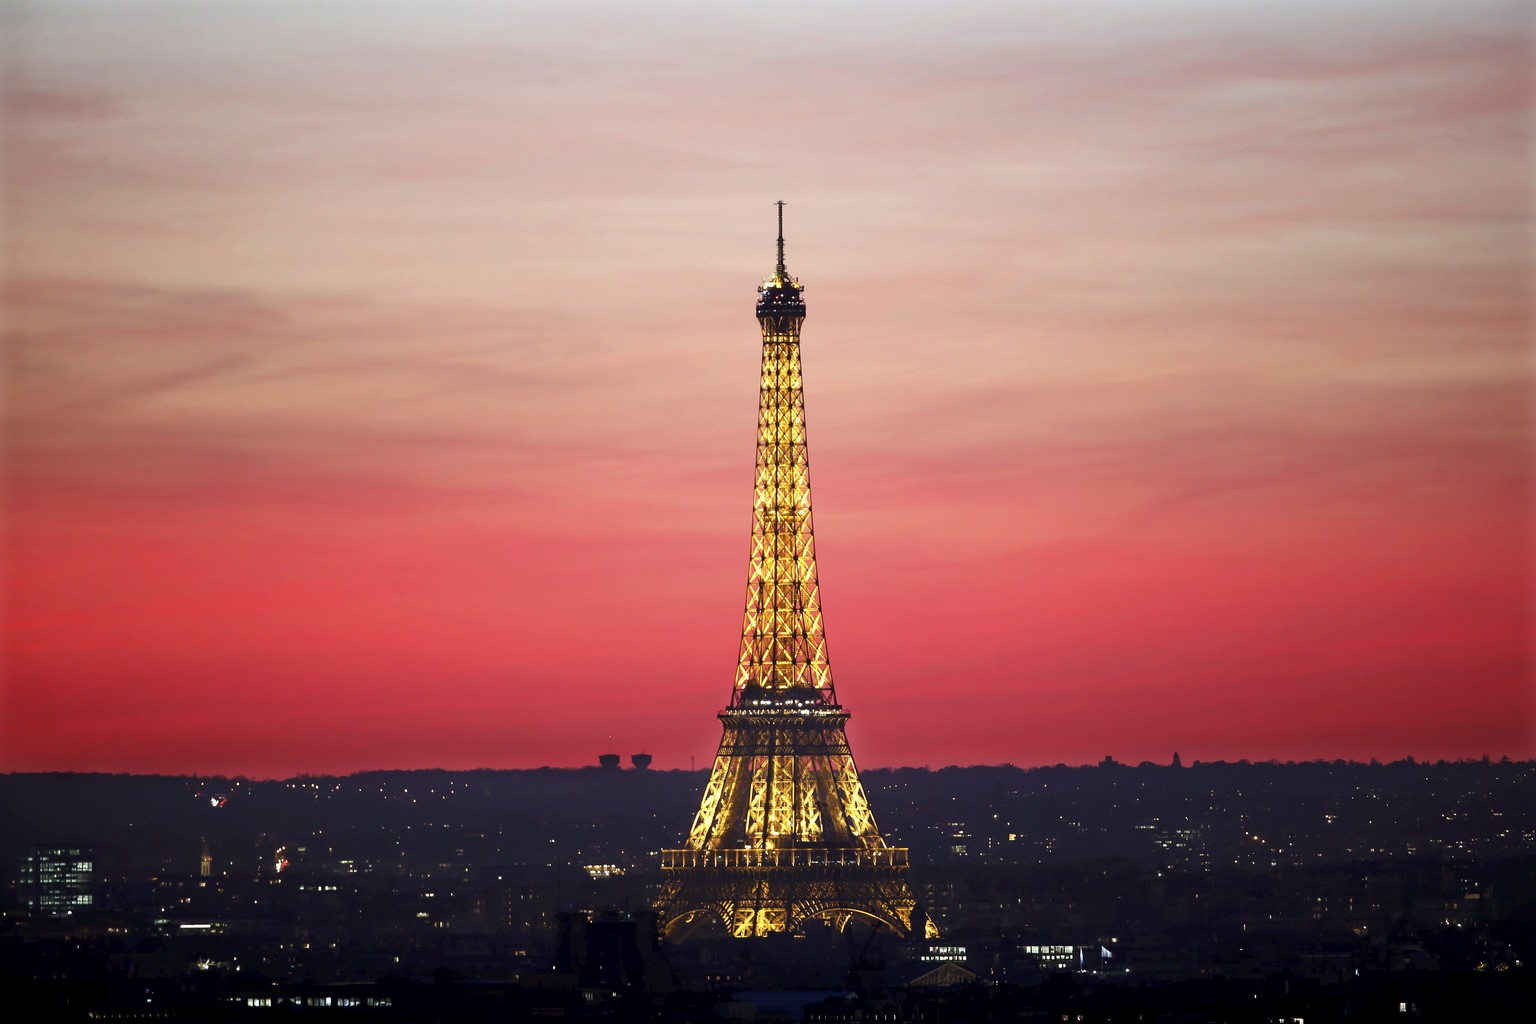 FILE PHOTO - The Eiffel Tower is seen at sunset in Paris, France, one of the Olympics 2024 bid cities, November 9, 2015. REUTERS/Charles Platiau/File Photo